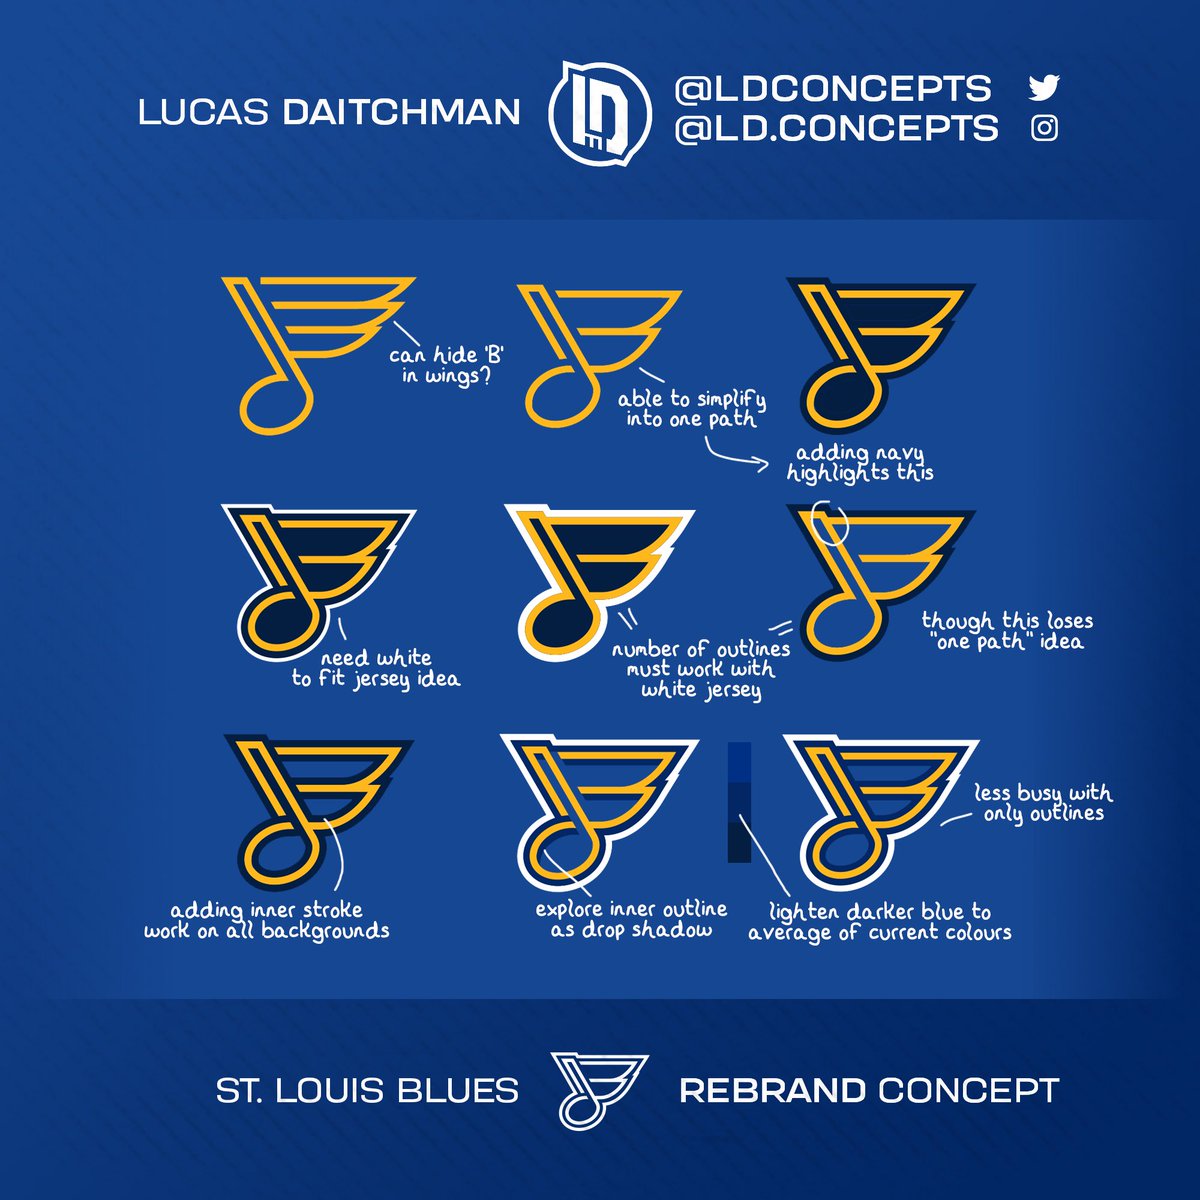 Lucas Daitchman on X: With the 2022 #StadiumSeries logo unveiled last  week, I put together a set of potential jerseys for the #Preds and  #GoBolts, bold like past editions with elements inspired